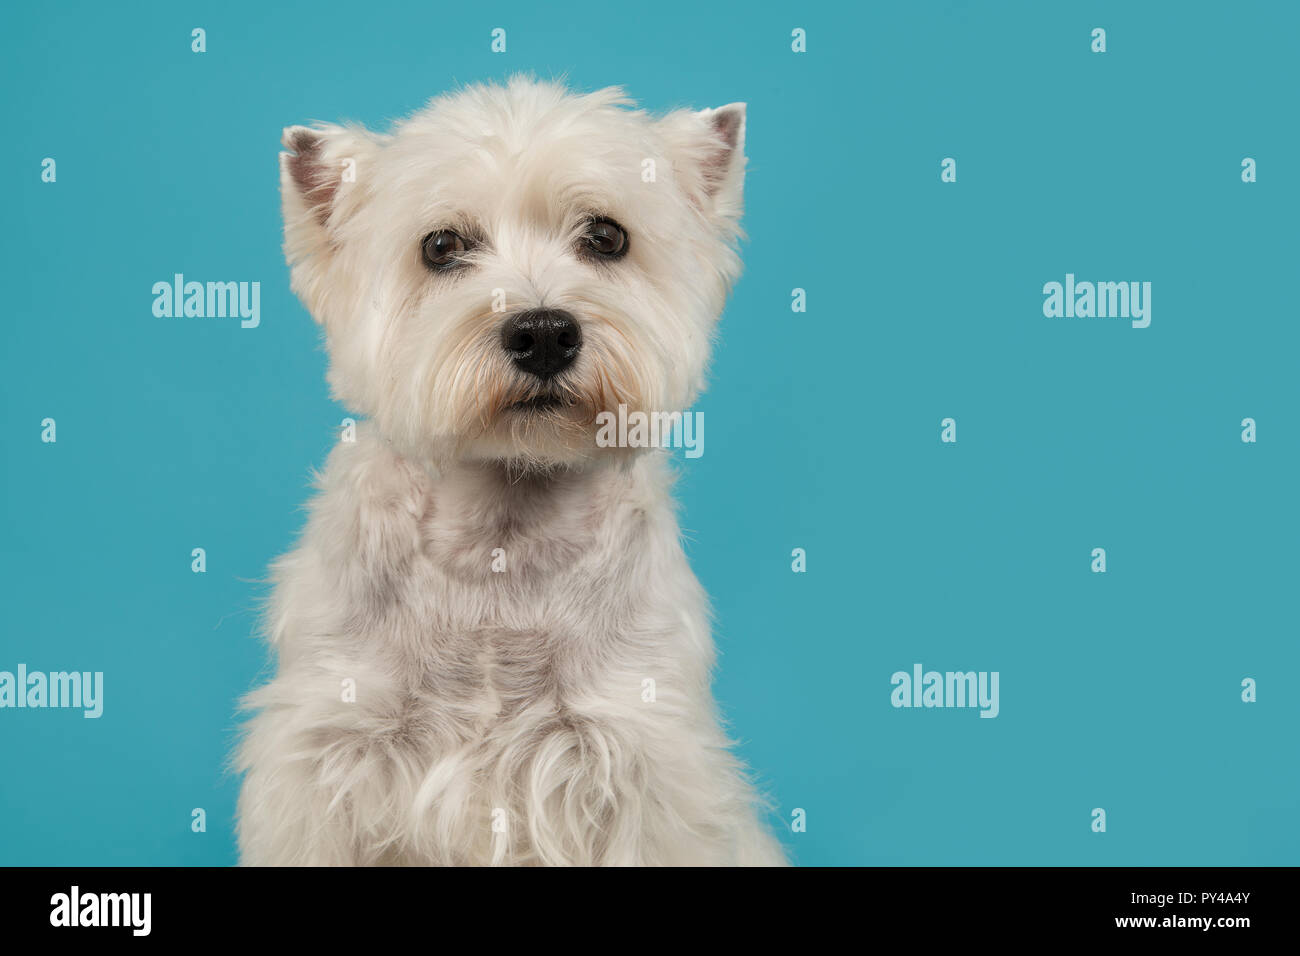 Portrait of a West highland white terrier or westie dog looking at the camera on a blue background Stock Photo